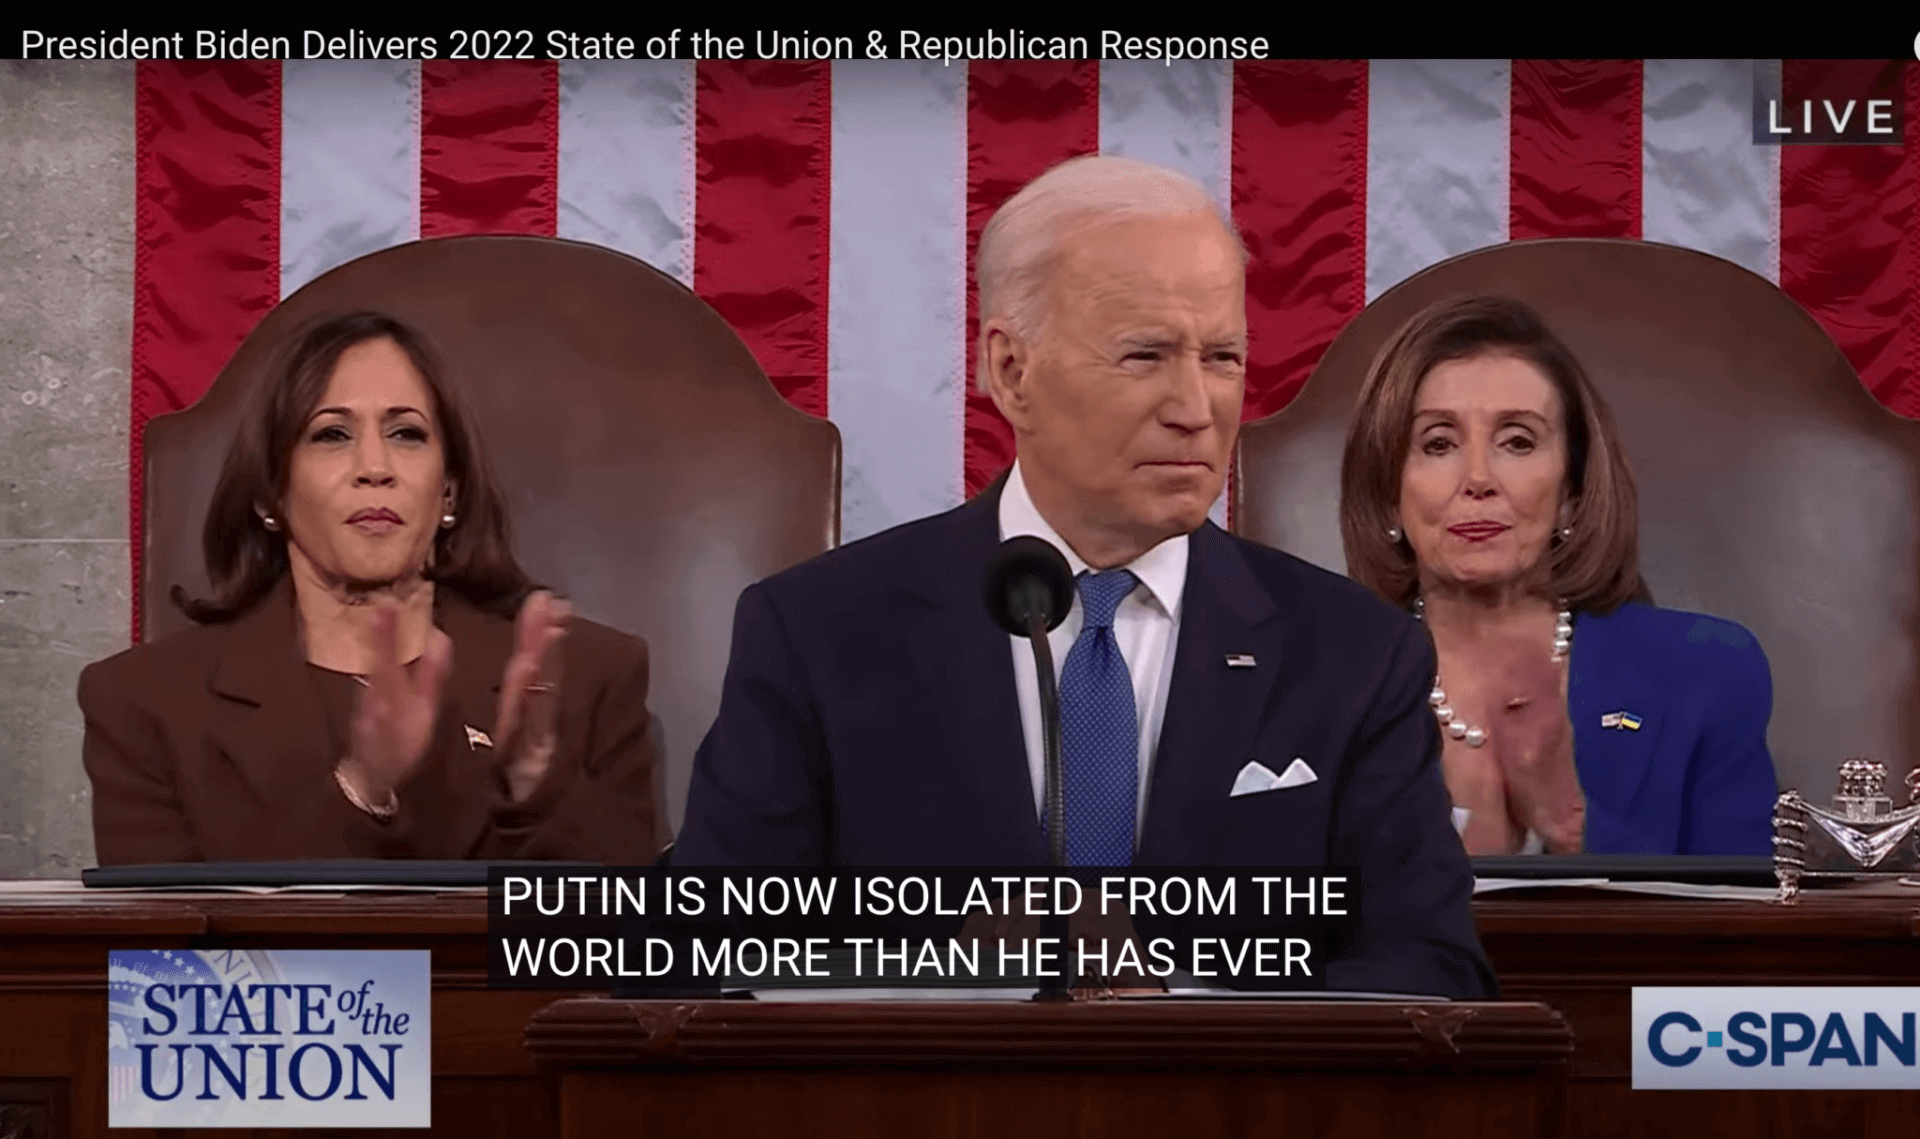 [CREDIT: CSPAN] U.S. President Joe Biden delivered his first State of the Union address Tuesday night. RI Congressman Jim Langevin praised his efforts to oppose Russia President Vladimir Putin's invasion of Ukraine and his leadership during the COVID-19 pandemic.